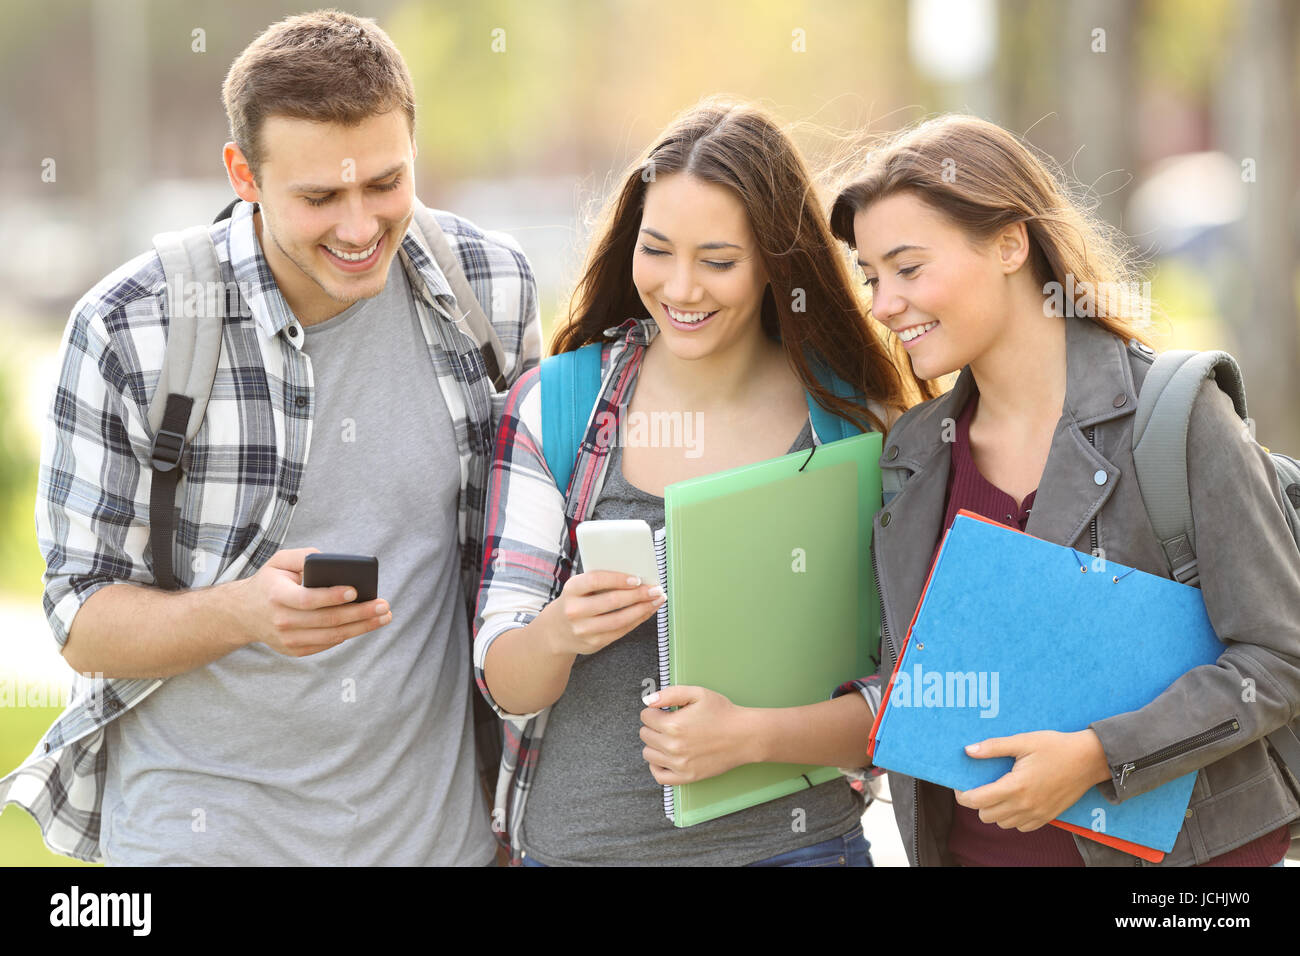 Three happy students checking smart phones outdoors in an university campus Stock Photo